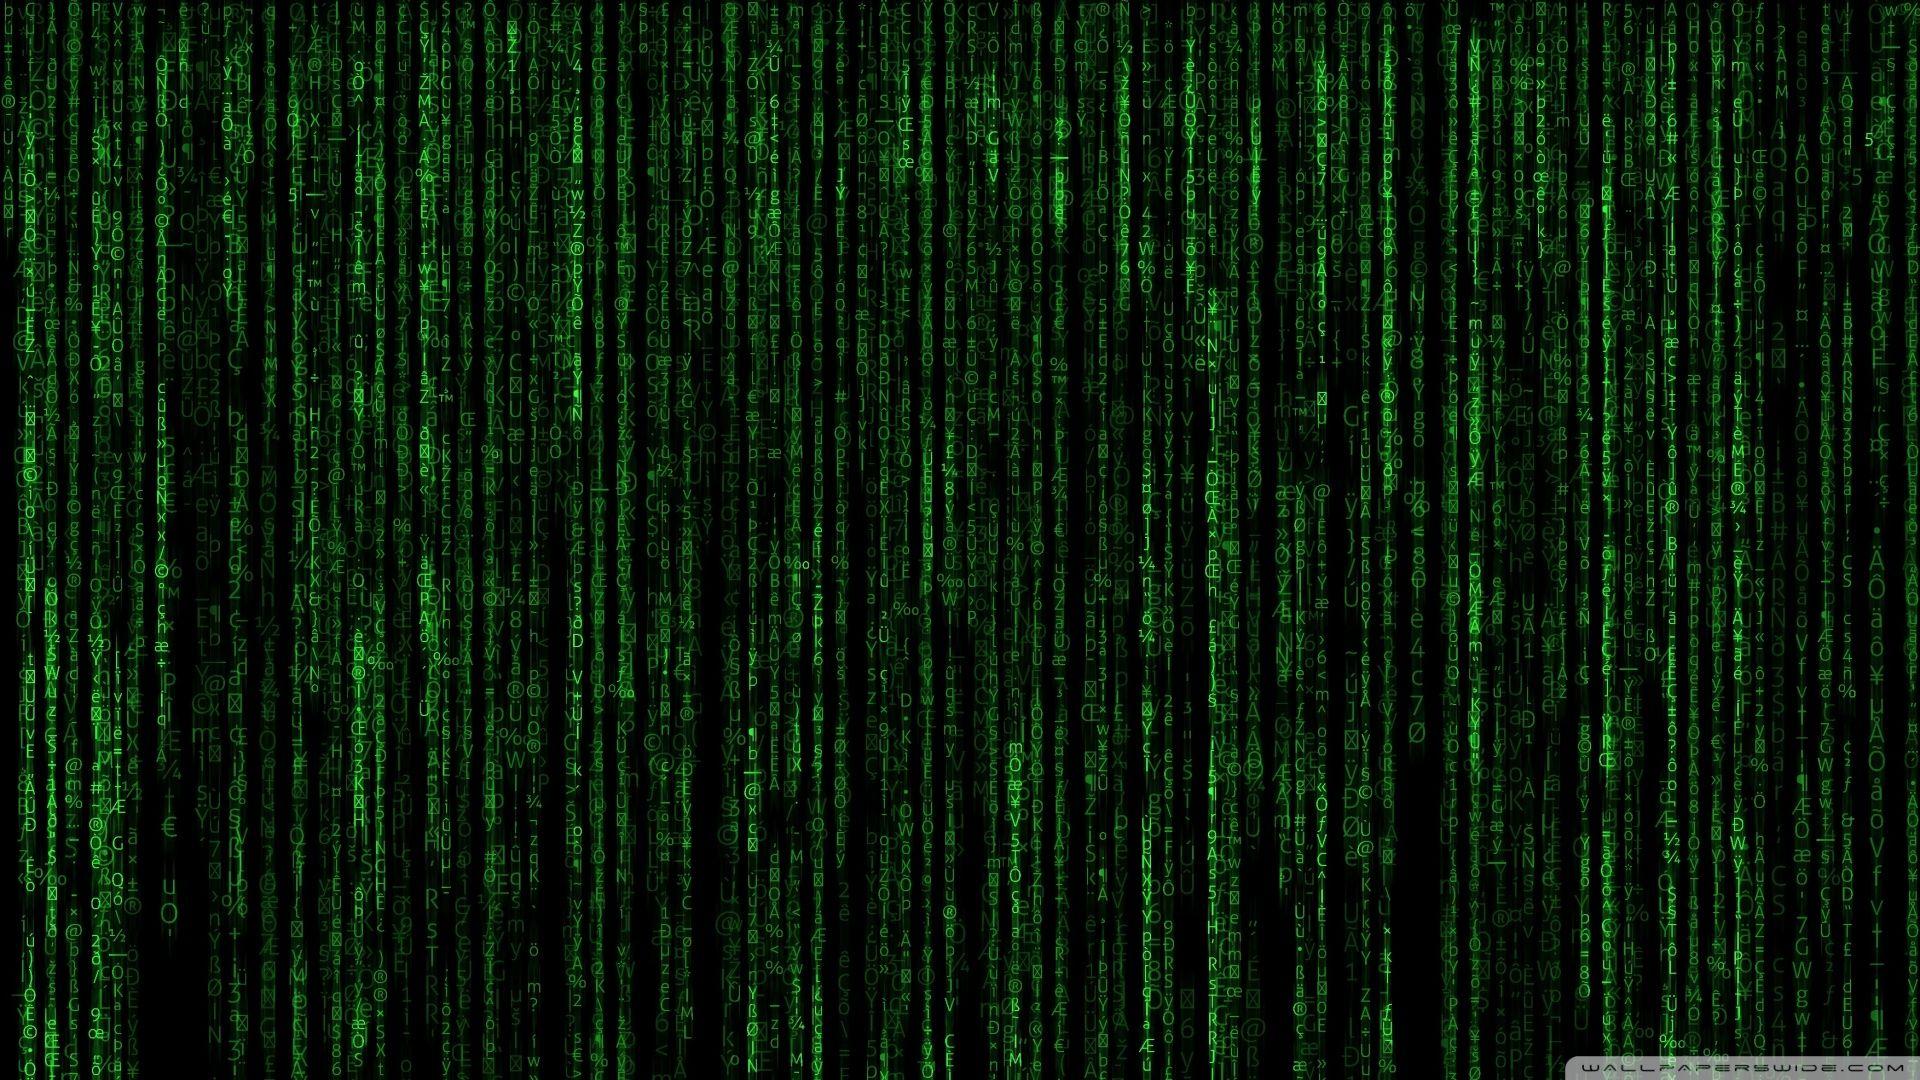 Matrix background image from WallpaperCave